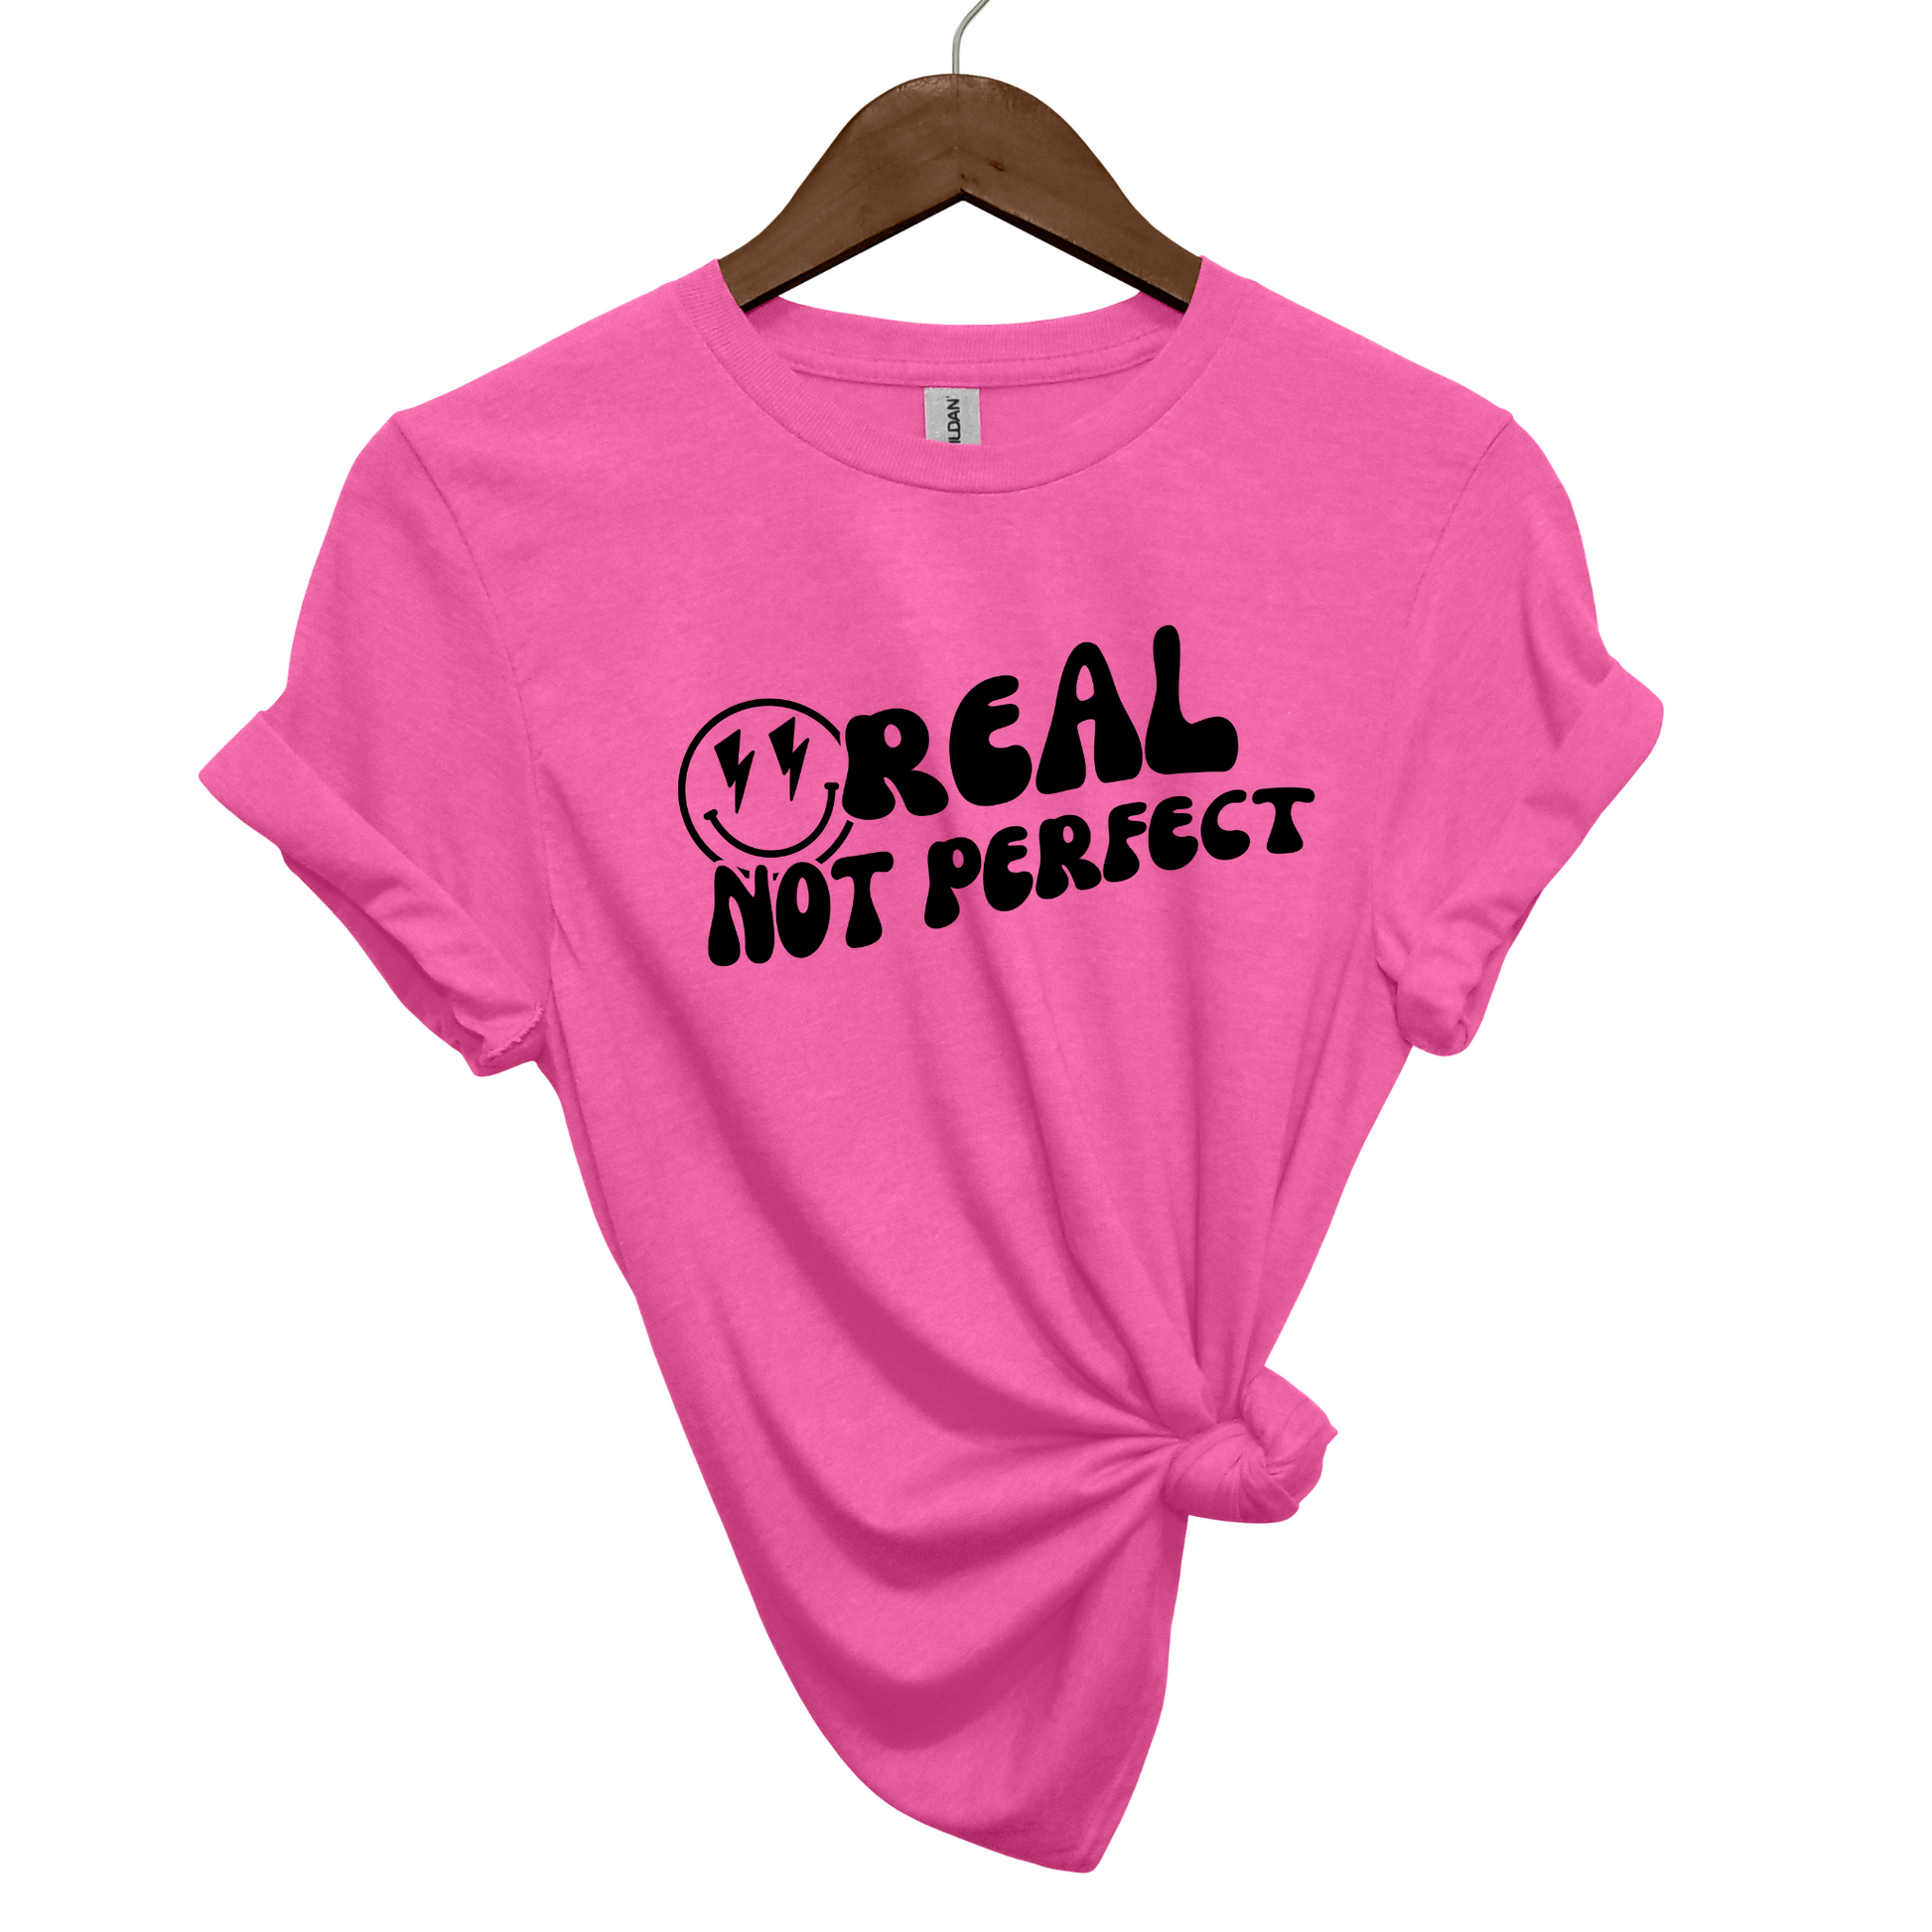 Real, Not Perfect Crewneck T Shirt heather heliconia